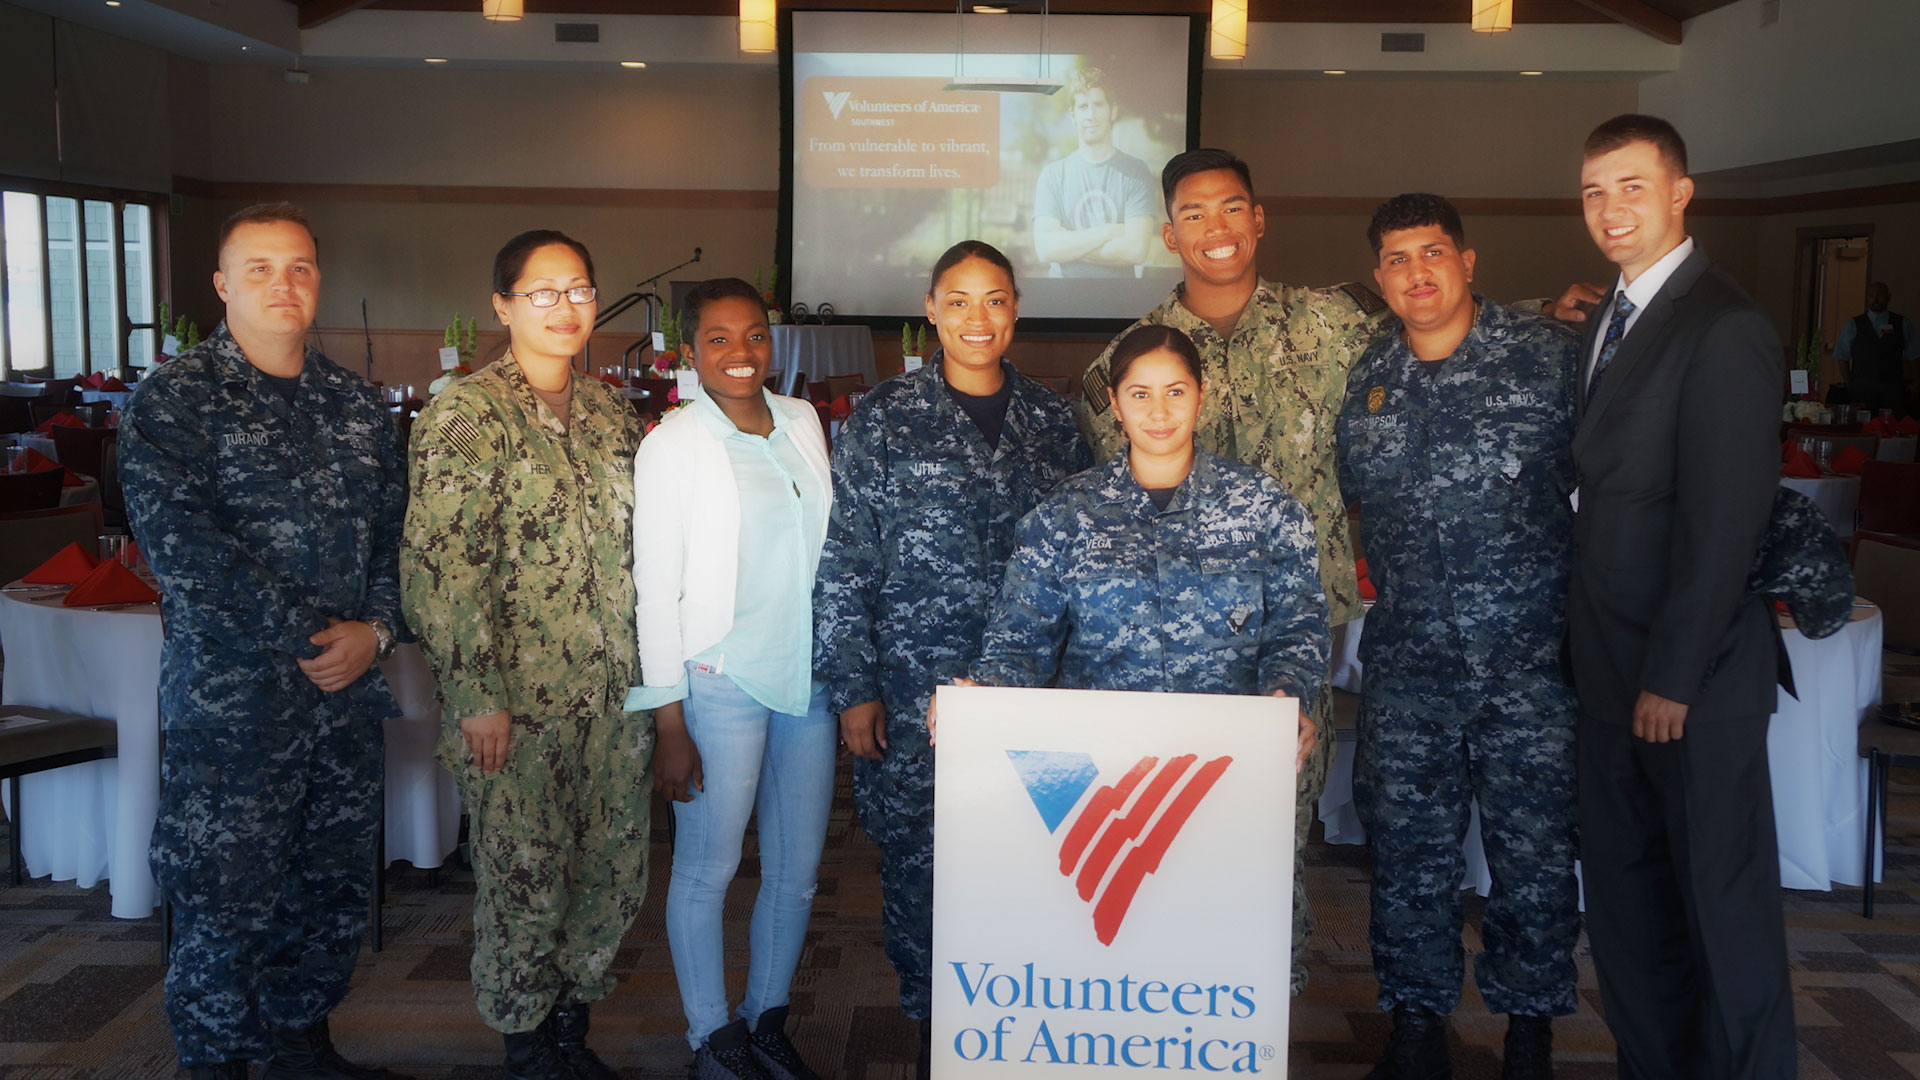 A photo of six people standing, five in military uniform, smiling and holding a VOASW banner, symbolic of Volunteers of America Southwest contact info.